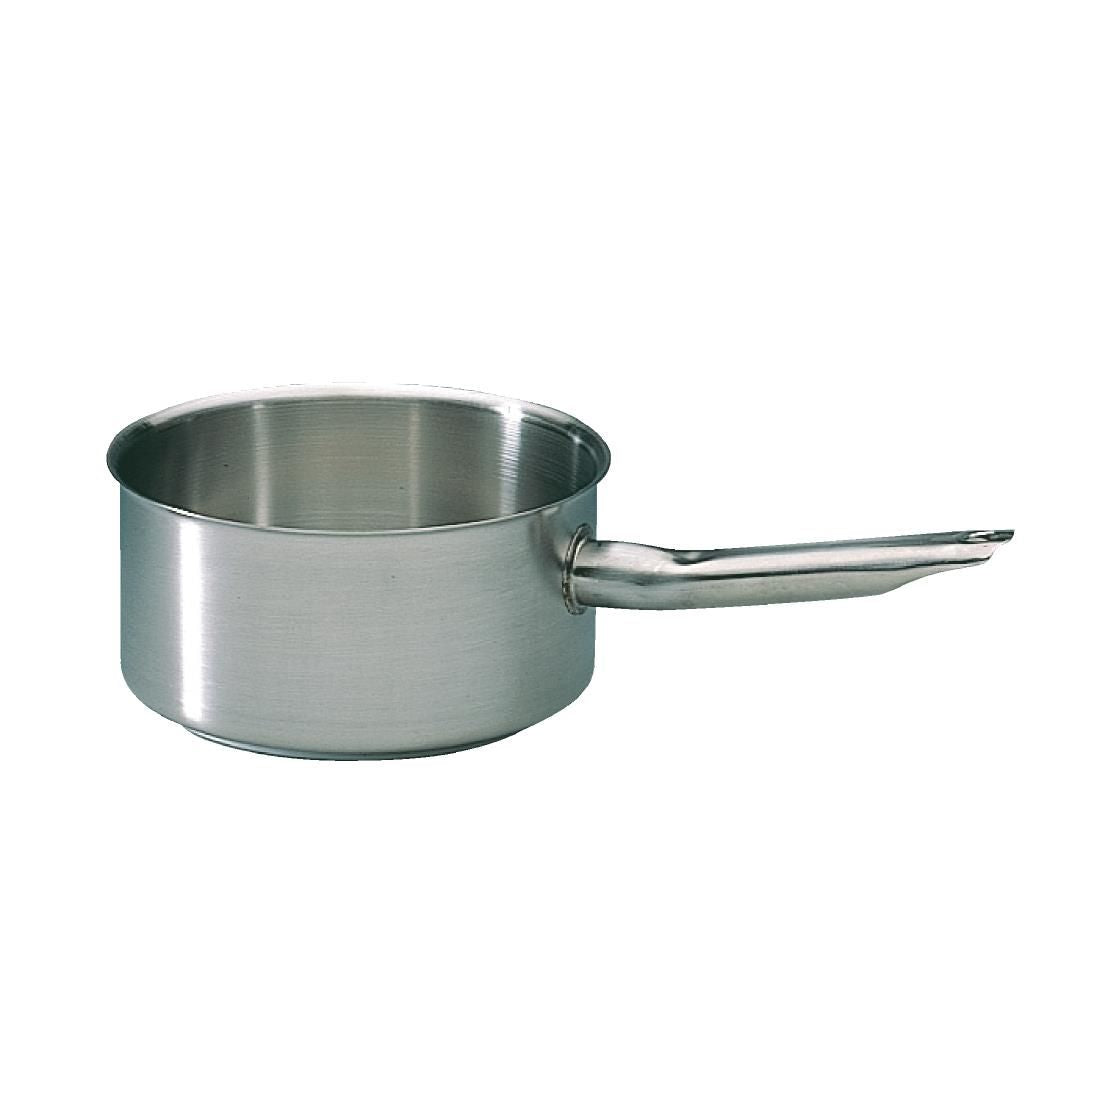 Bourgeat Stainless Steel Excellence Saucepan 1.6Ltr JD Catering Equipment Solutions Ltd